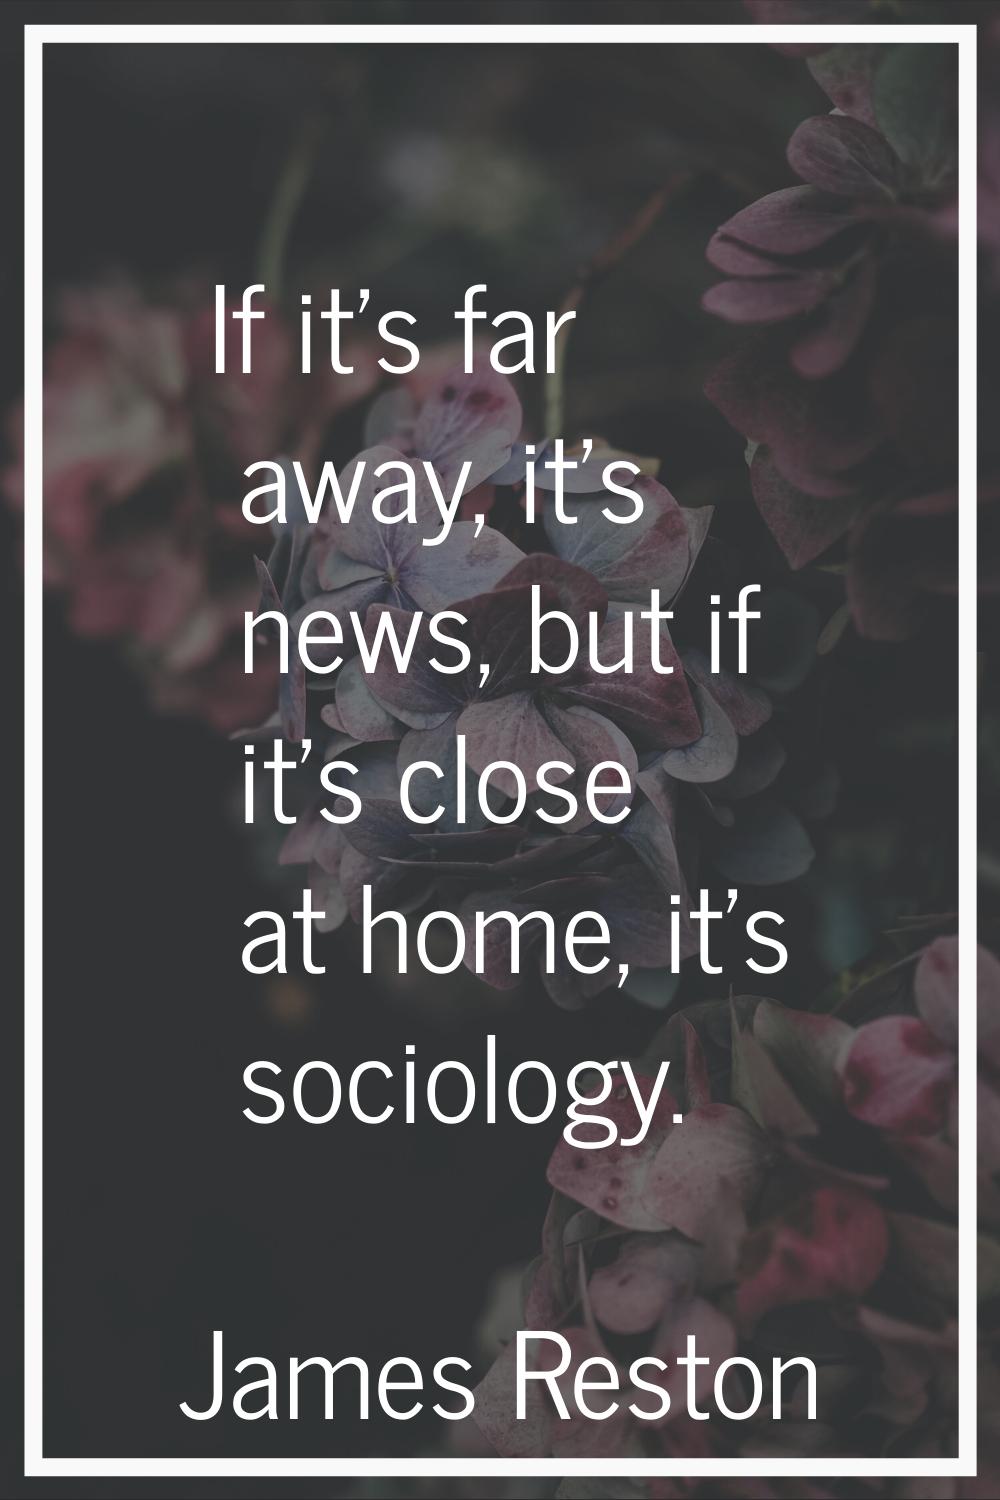 If it's far away, it's news, but if it's close at home, it's sociology.